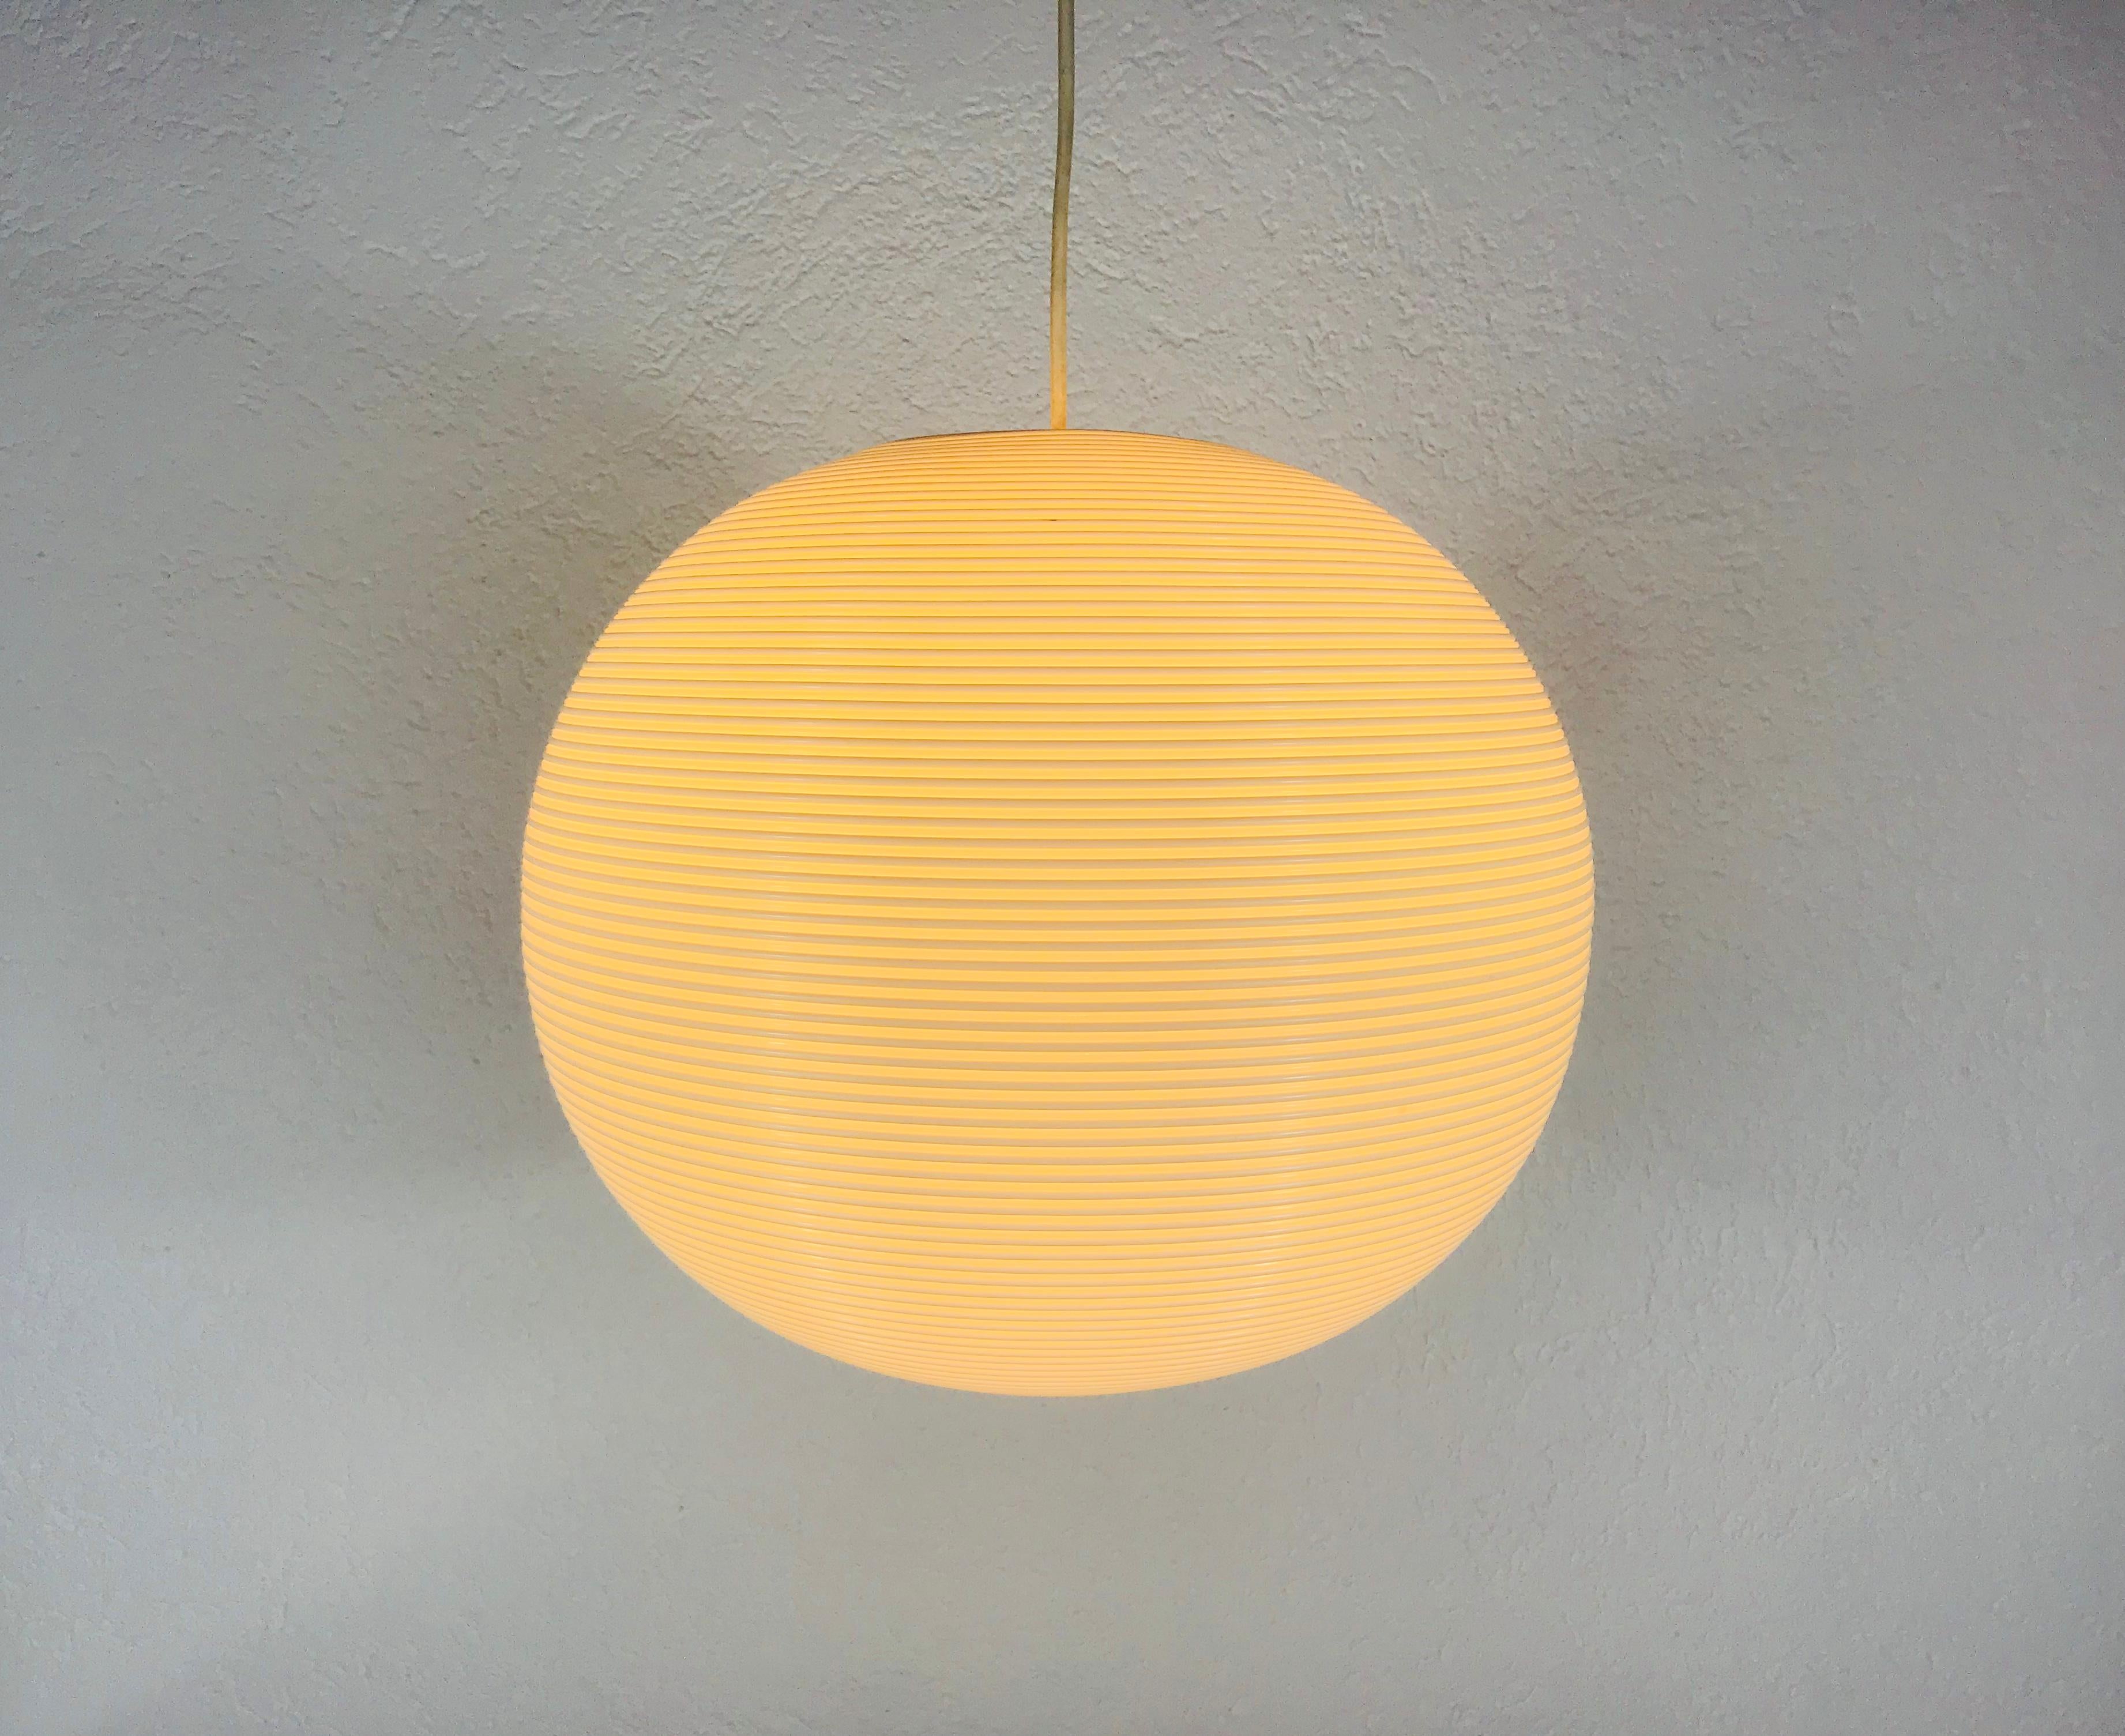 One of two Mid-Century Modern ball pendant lamp by Heifetz Rotaflex made in the 1960s. The lamp shade is made of continuous plastic cords spun into a ceiling fixture. The top of the lamp is hard plastic. Both lamps are in good vintage